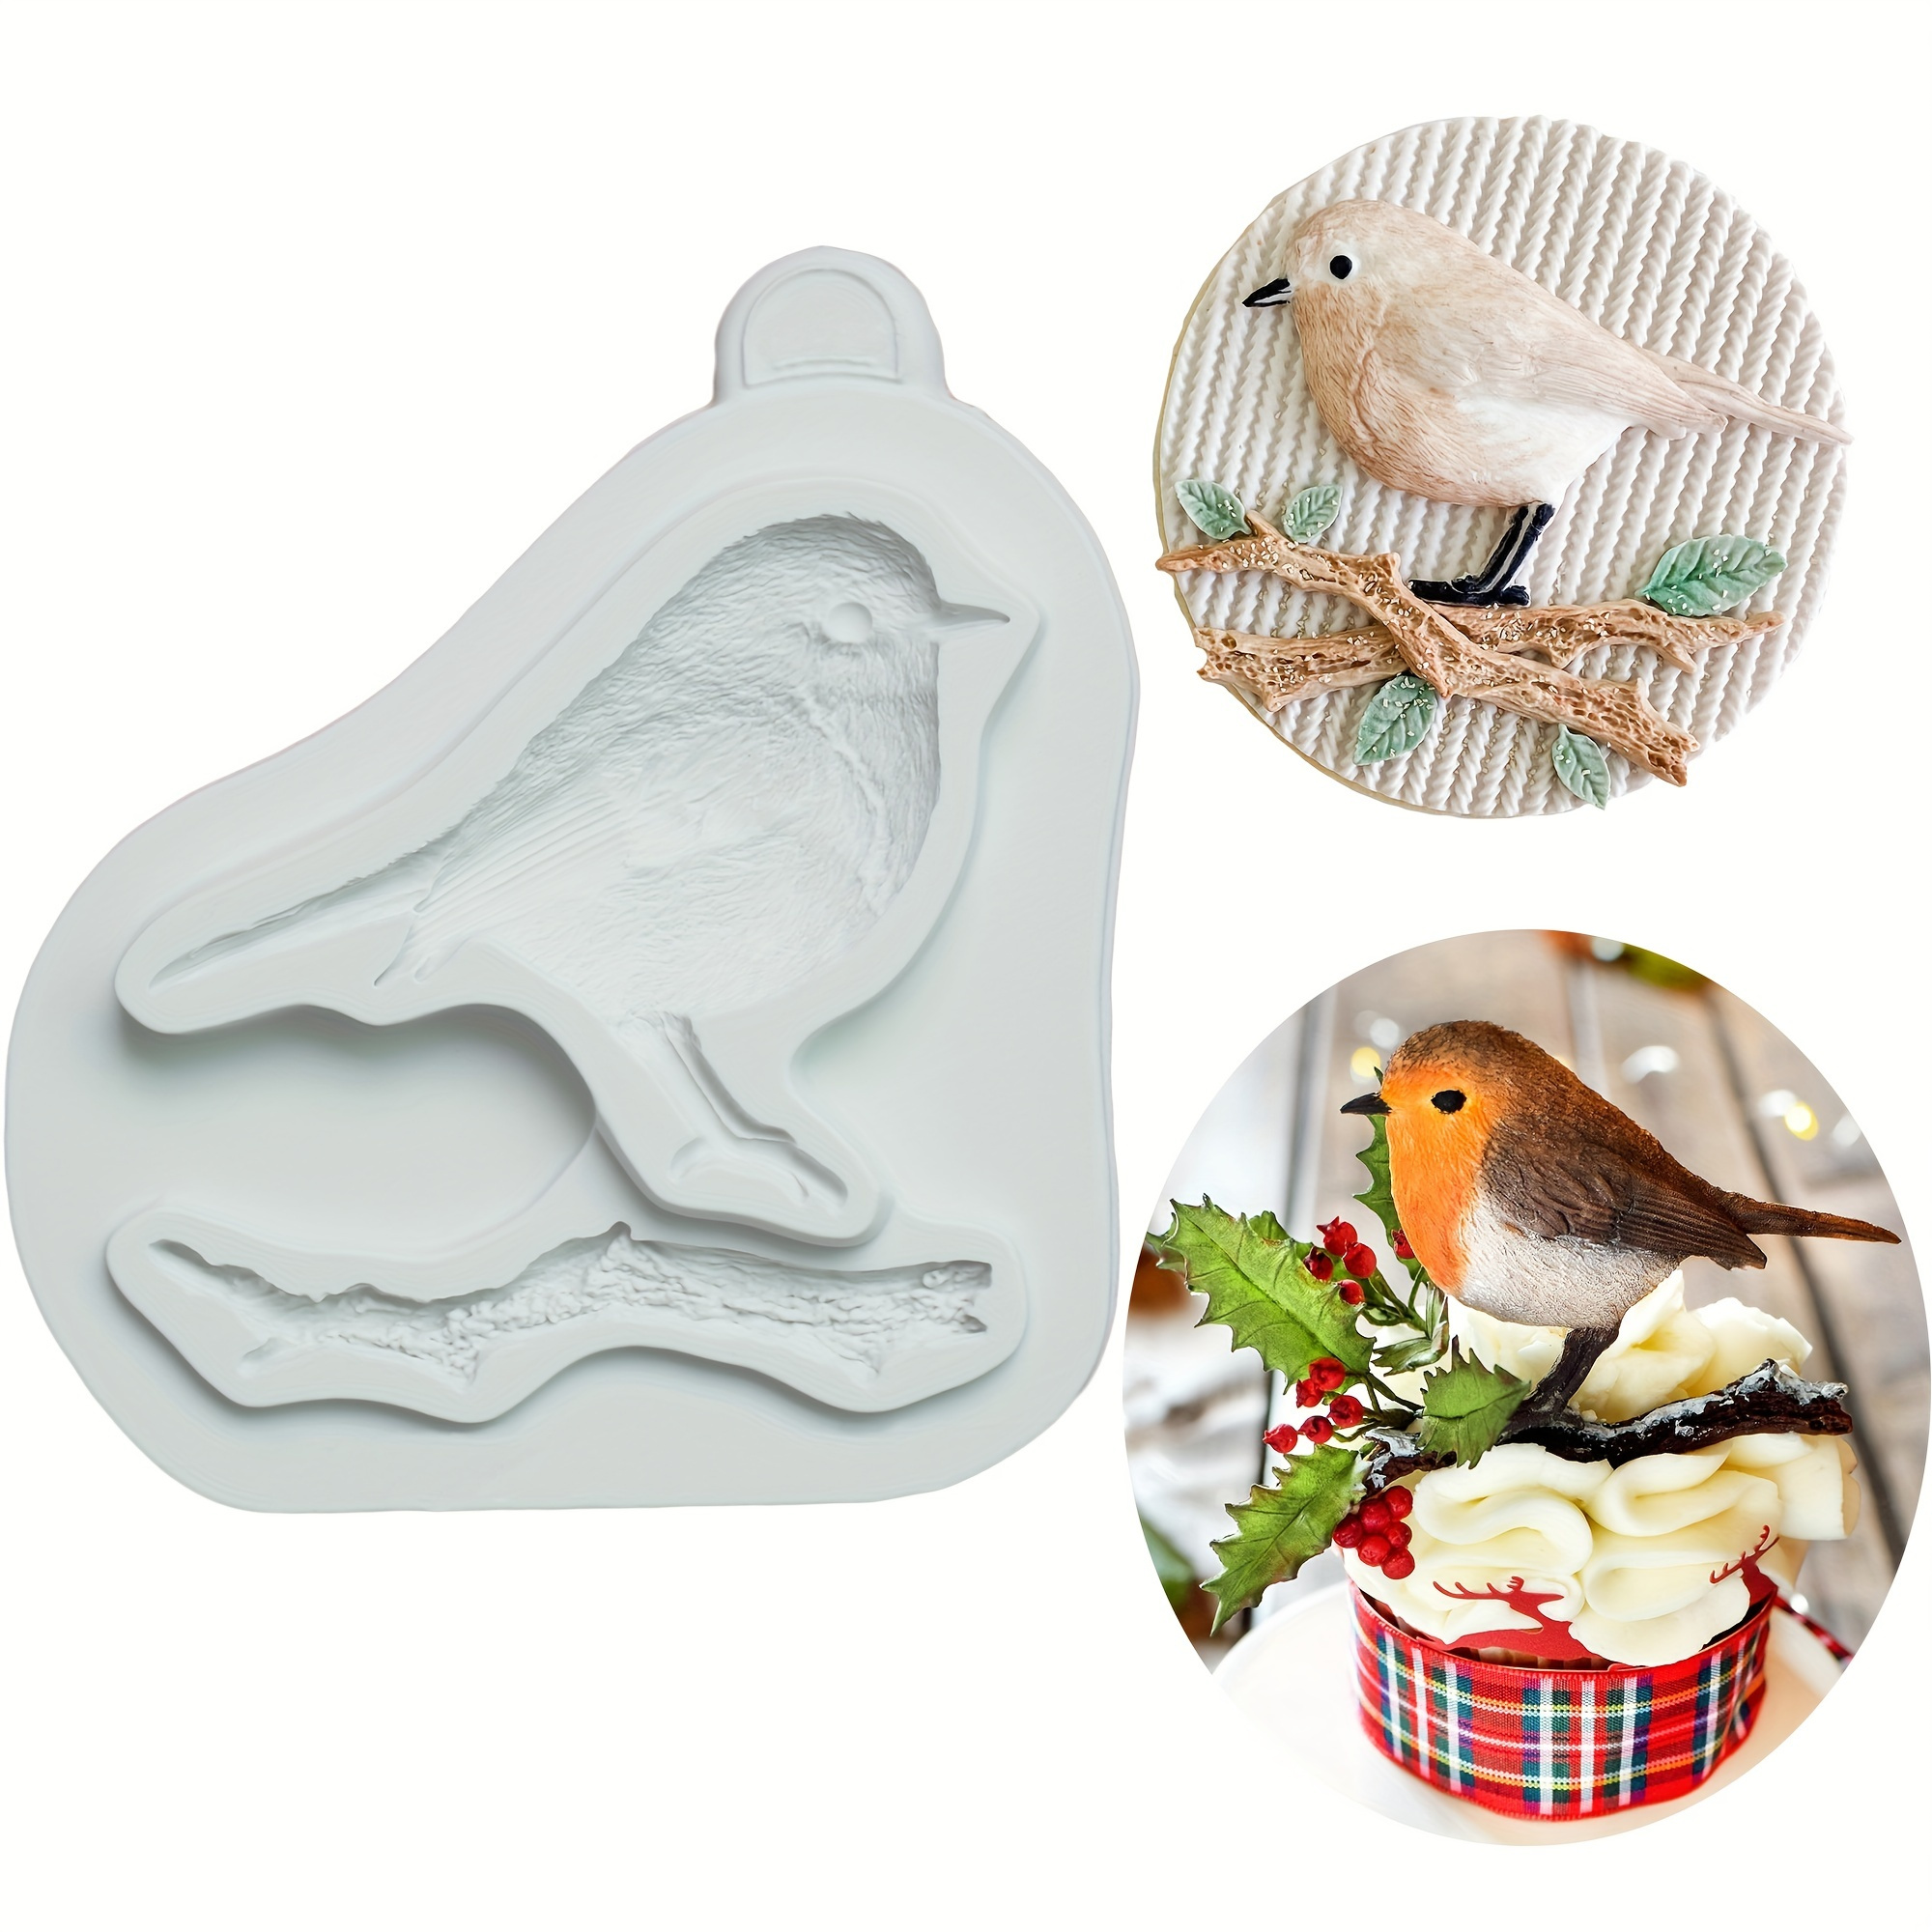 Bakell Small 3 x 3 inch Birds Silicone Mold